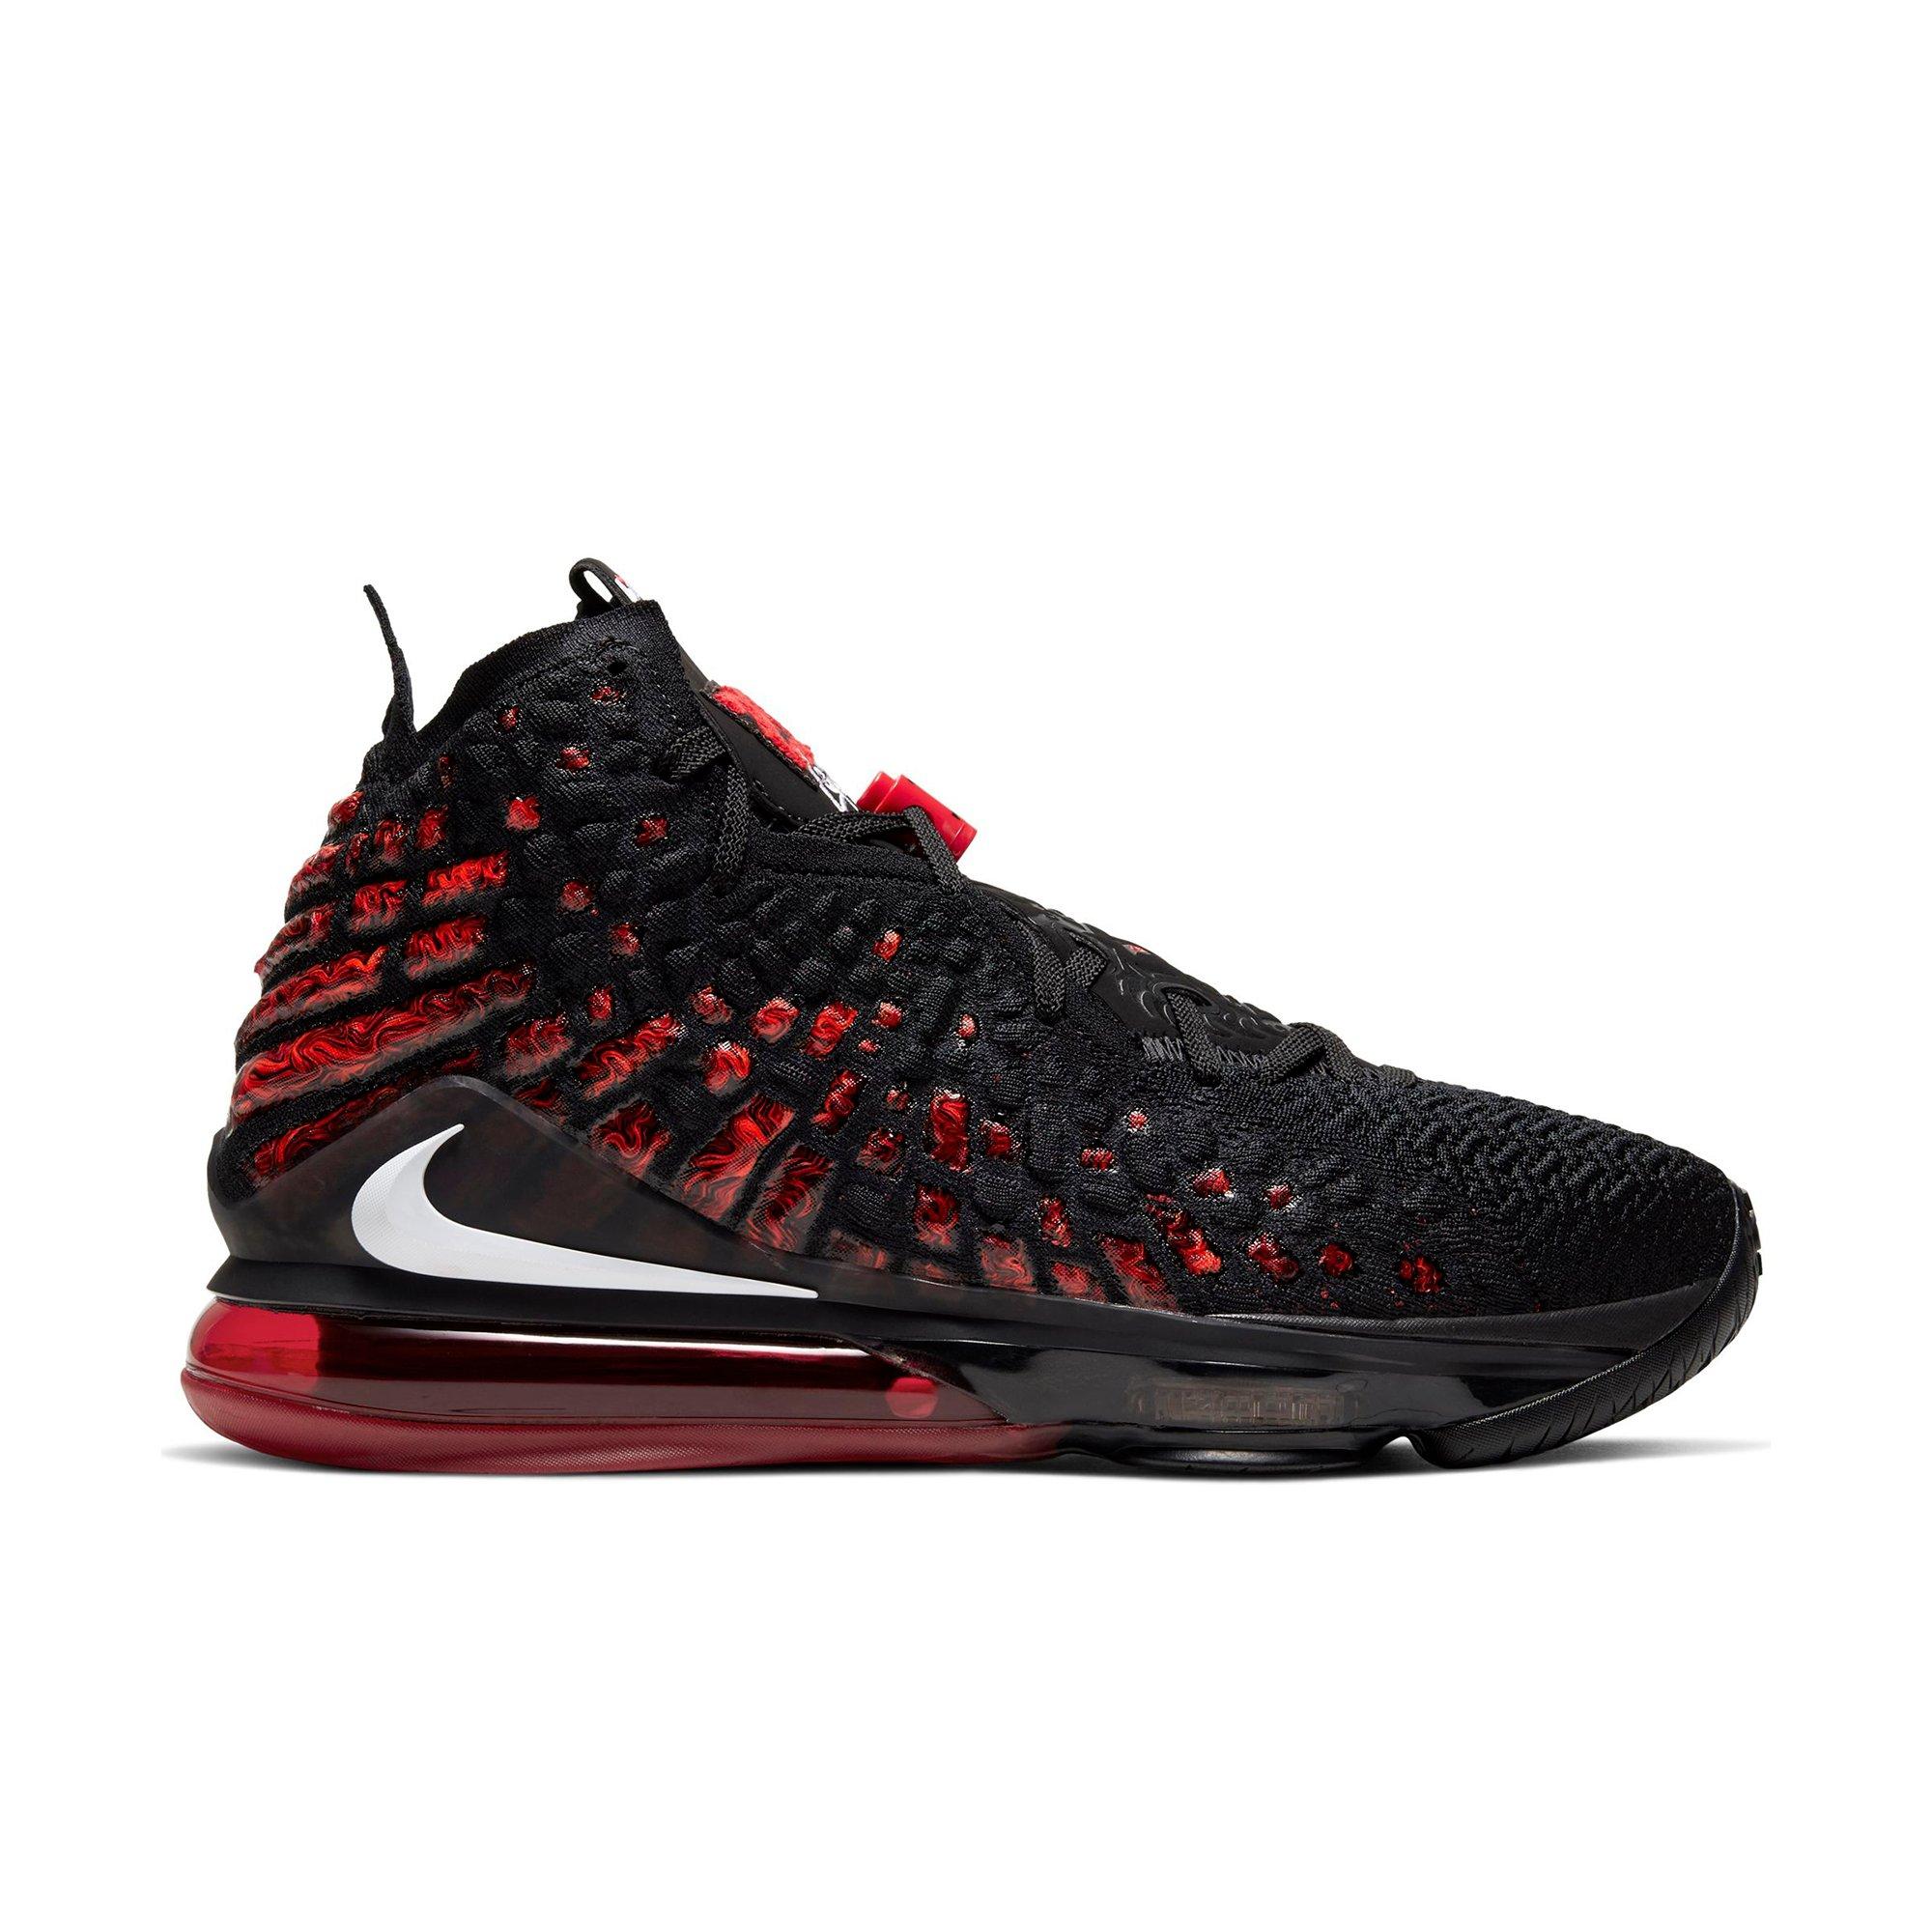 lebron 17 shoes red and black